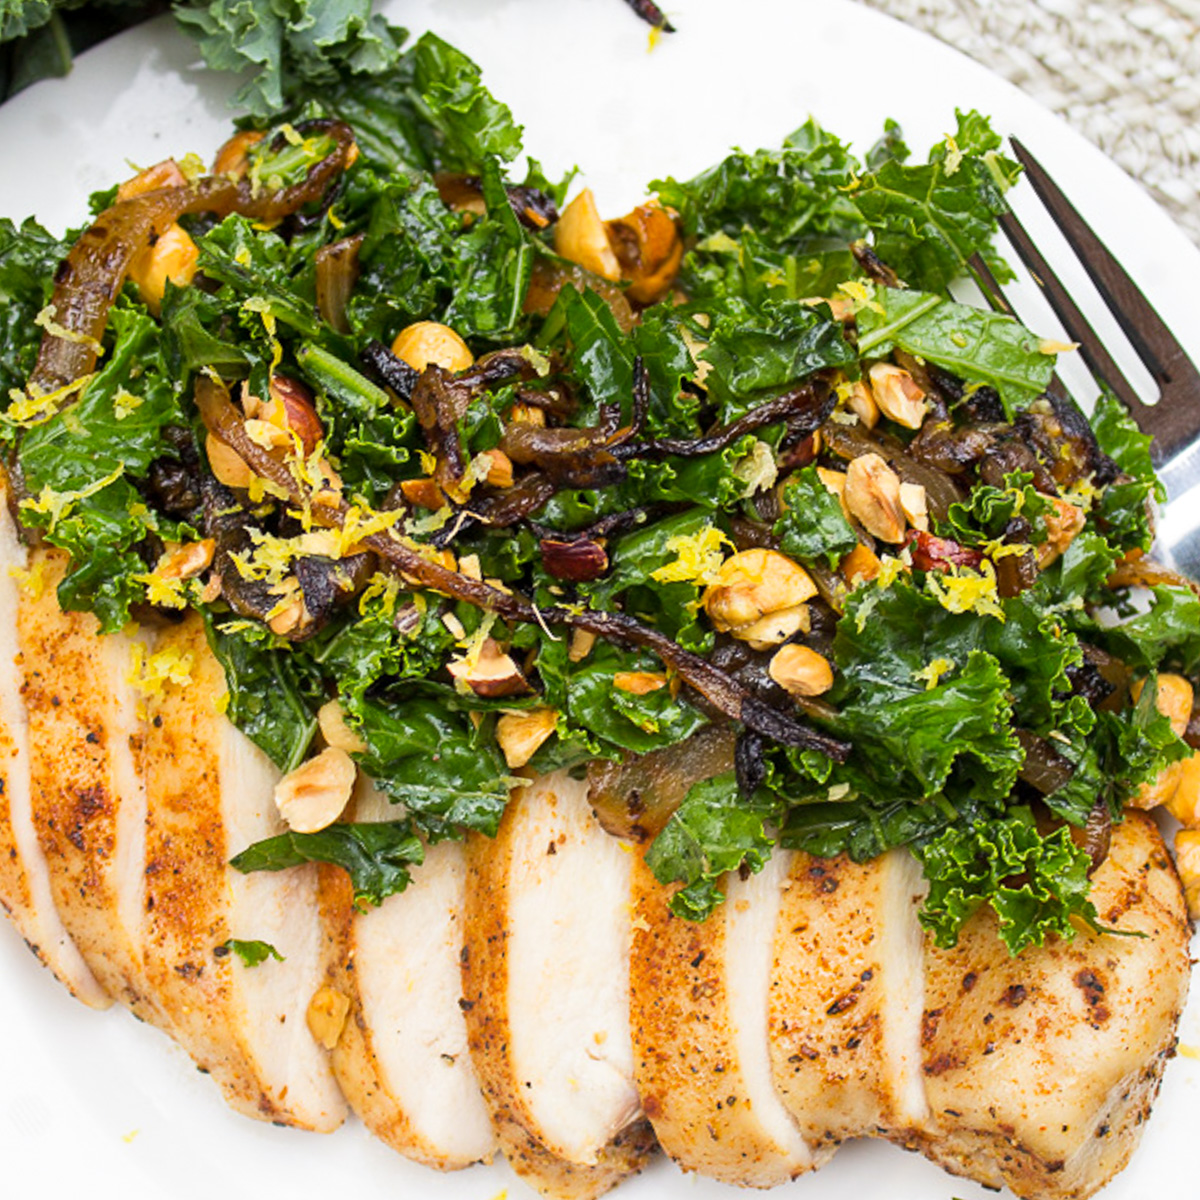 kale slaw topping a sliced cooked chicken breast.